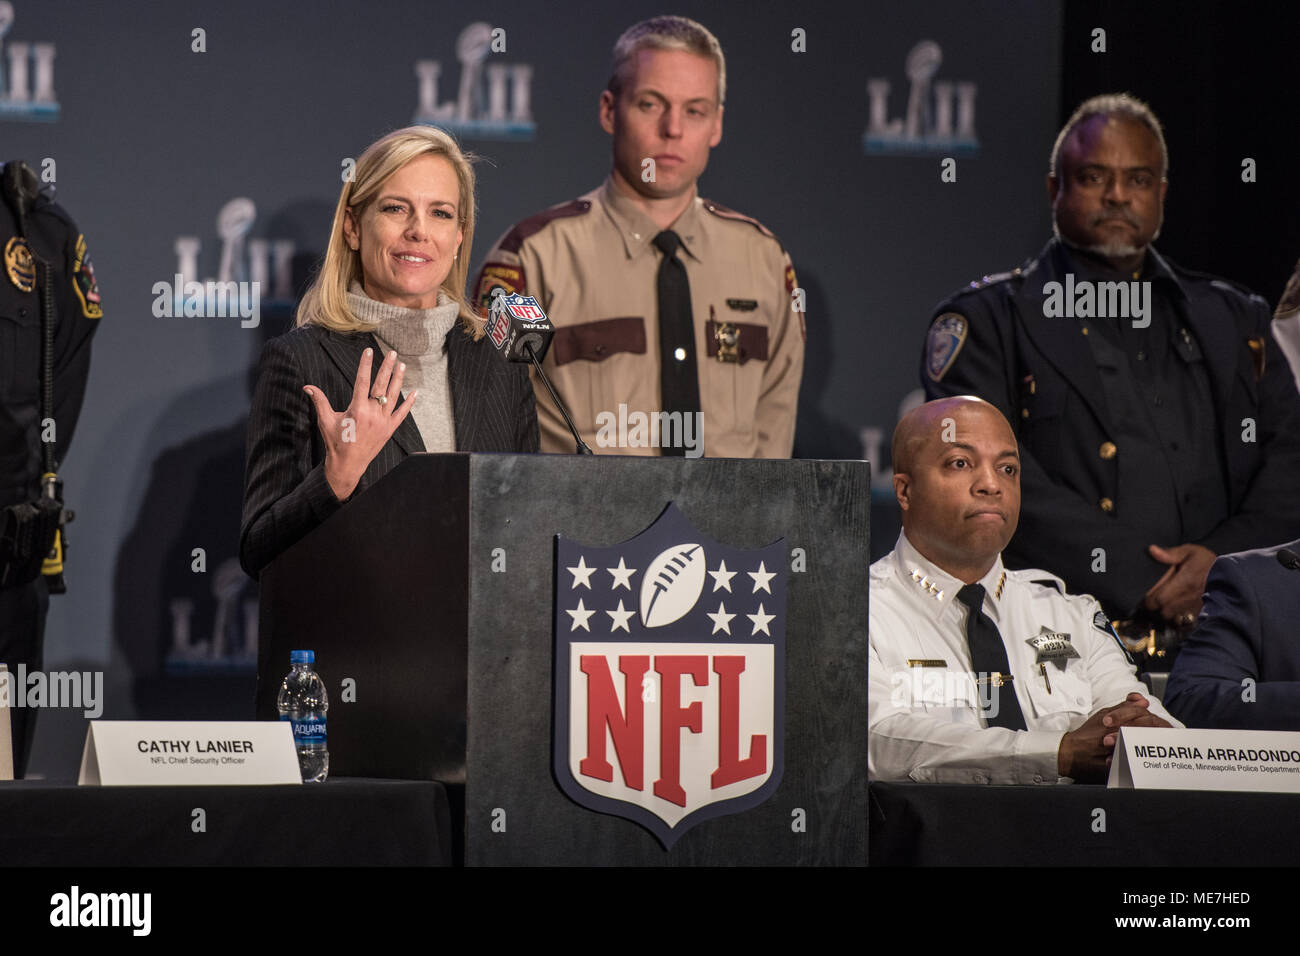 U.S. Homeland Security Secretary Kirstjen Nielsen speaks during the National Football League (NFL) Security Press Conference at the Hilton Minneapolis prior to the Super Bowl LII January 31, 2018 in Minneapolis, Minnesota.    (photo by Josh Denmark via Planetpix) Stock Photo